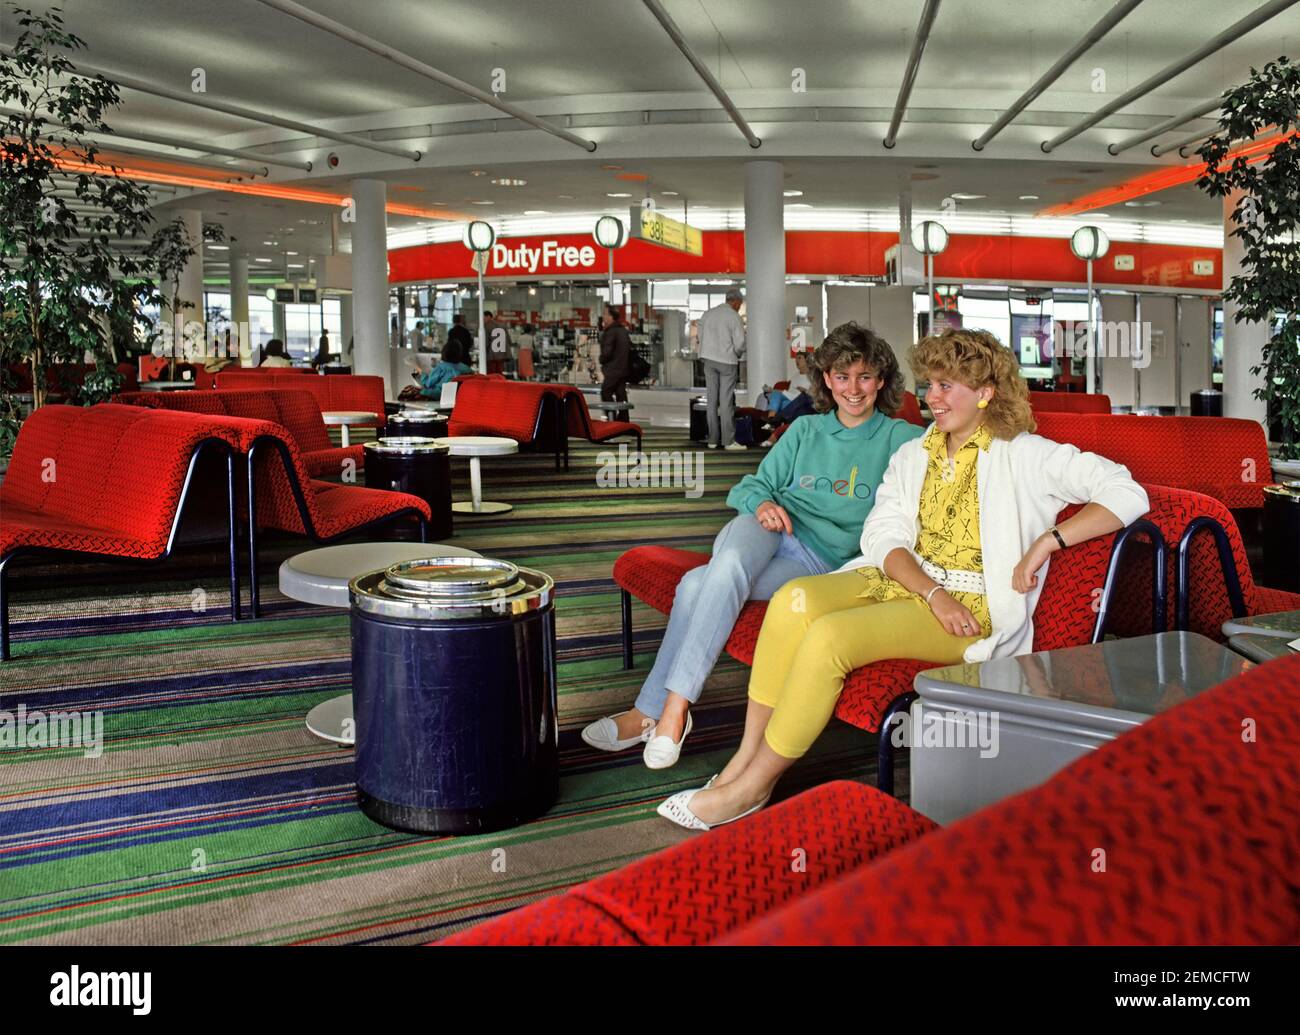 Two model released teenage girls talking and wearing 1980s fashion about to travel to 80s summer family holiday in Spain waiting in the departure lounge building with Duty Free shop & sign beyond at Gatwick Airport West Sussex England UK an historical archive image of the way we were in 1986 Stock Photo